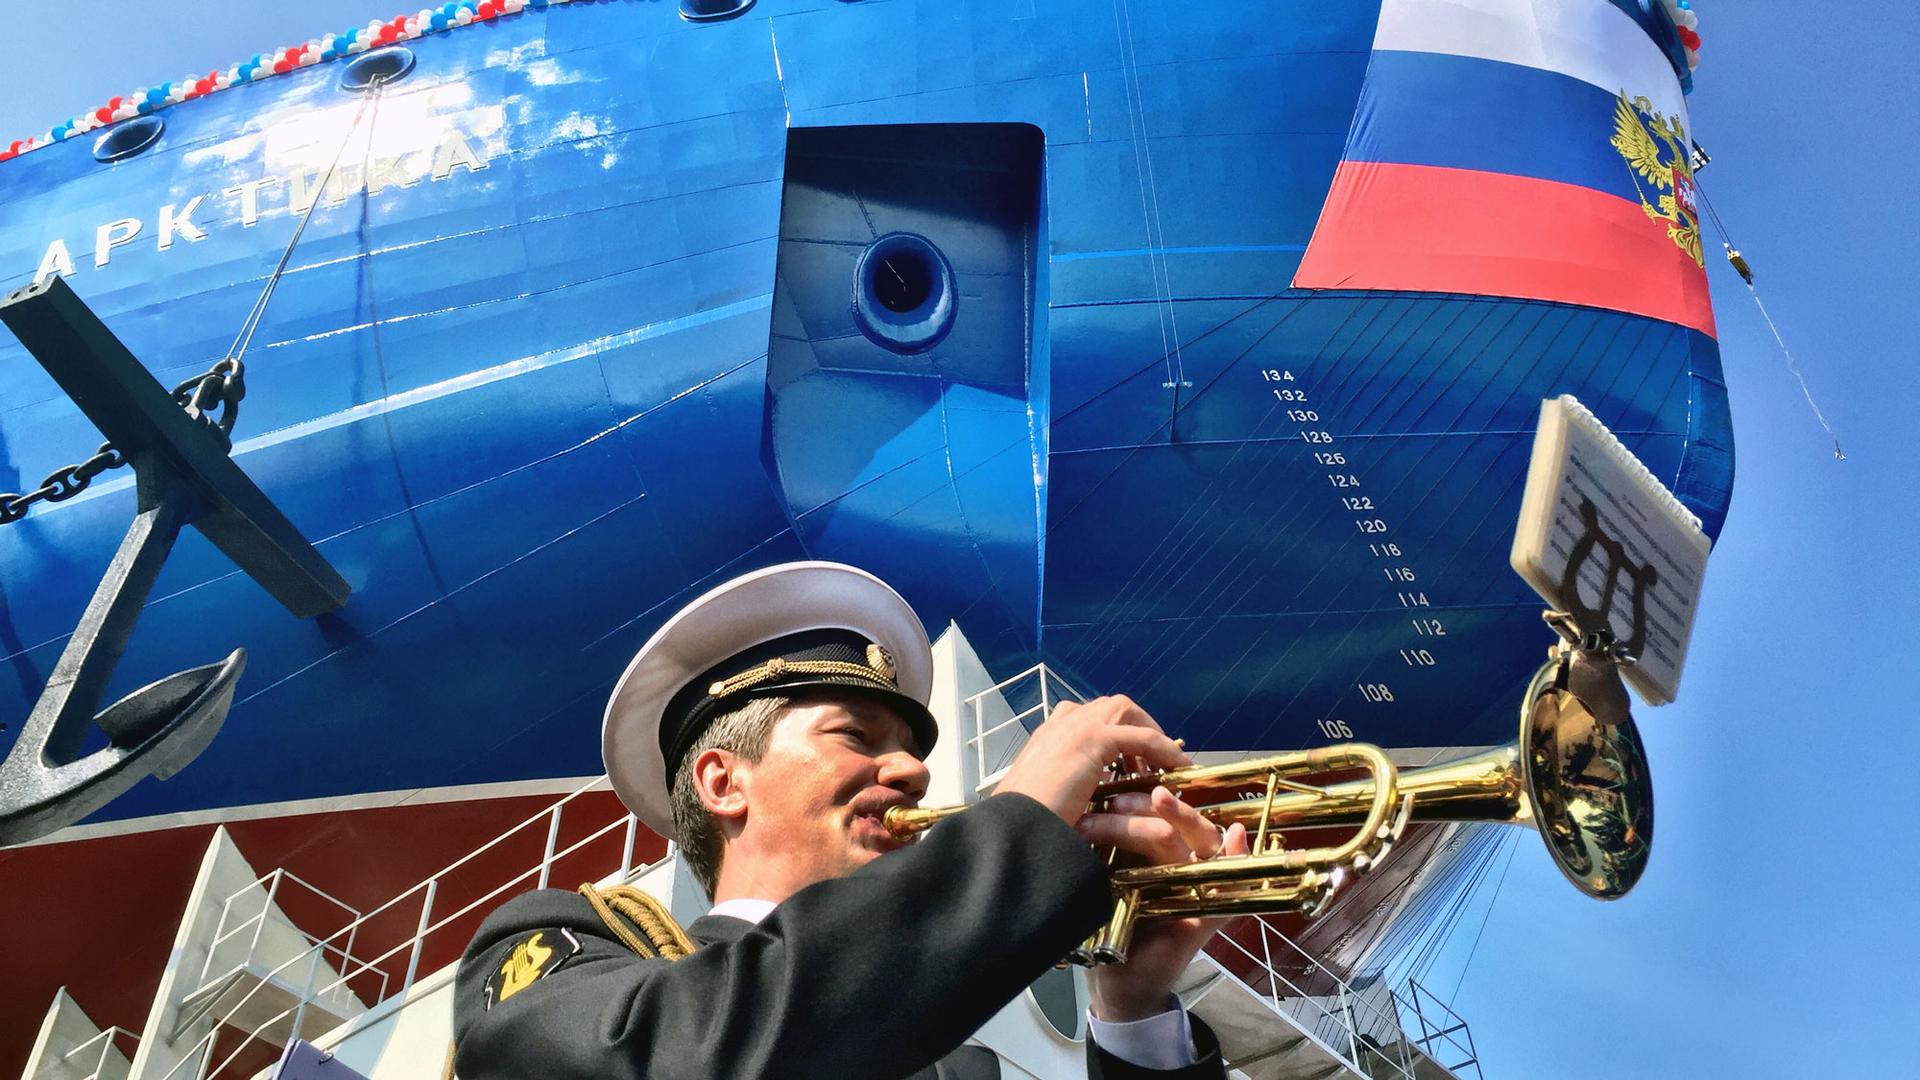 A man in a military uniform plays the trumpet. Behind him is the blue hull of the icebreaker ship Arktika.